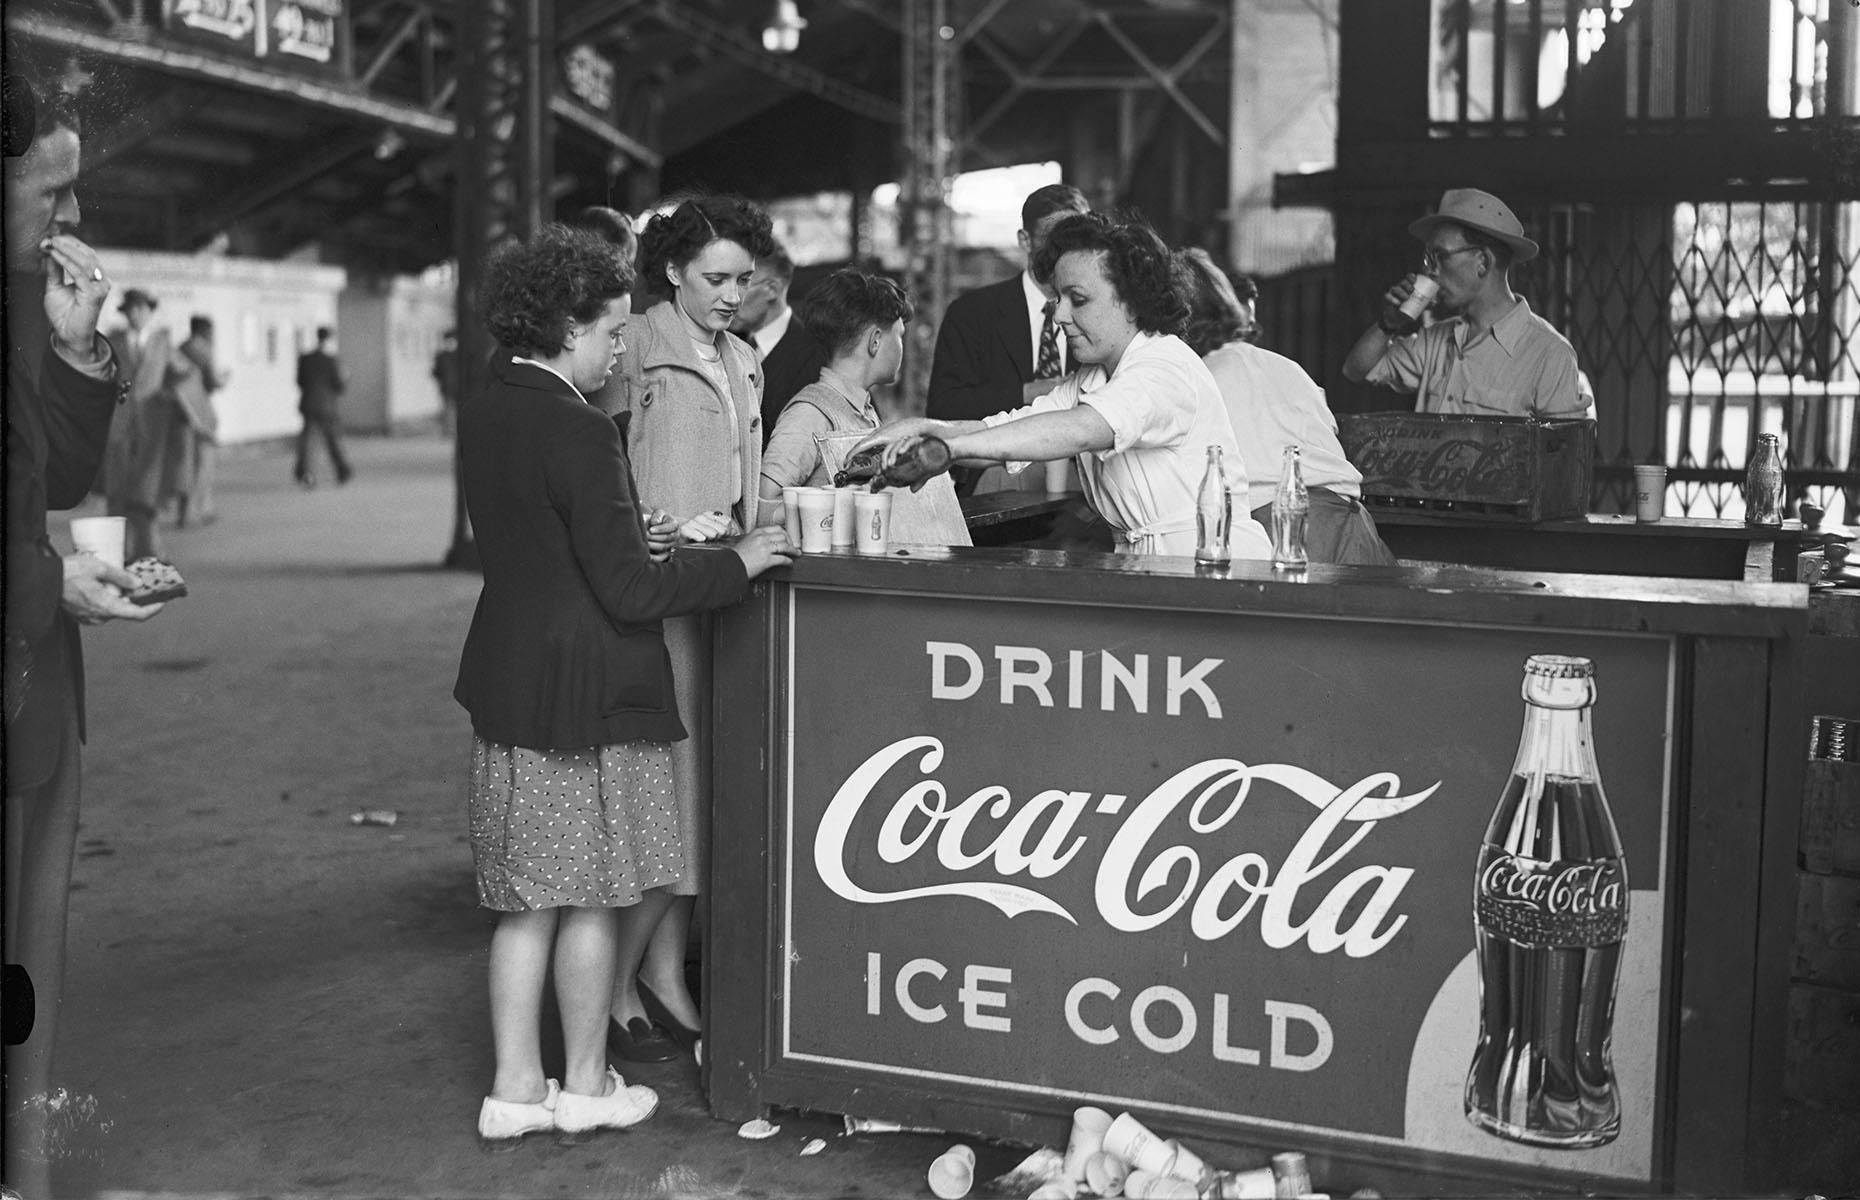 Never one to miss an advertising opportunity, Coca-Cola was the first-ever Olympic sponsor, beginning its sponsorship at the Summer Games hosted in Amsterdam in 1928. Pictured is a Coca-Cola stall at Wembley Stadium, London, during the Olympic Games in August 1948.